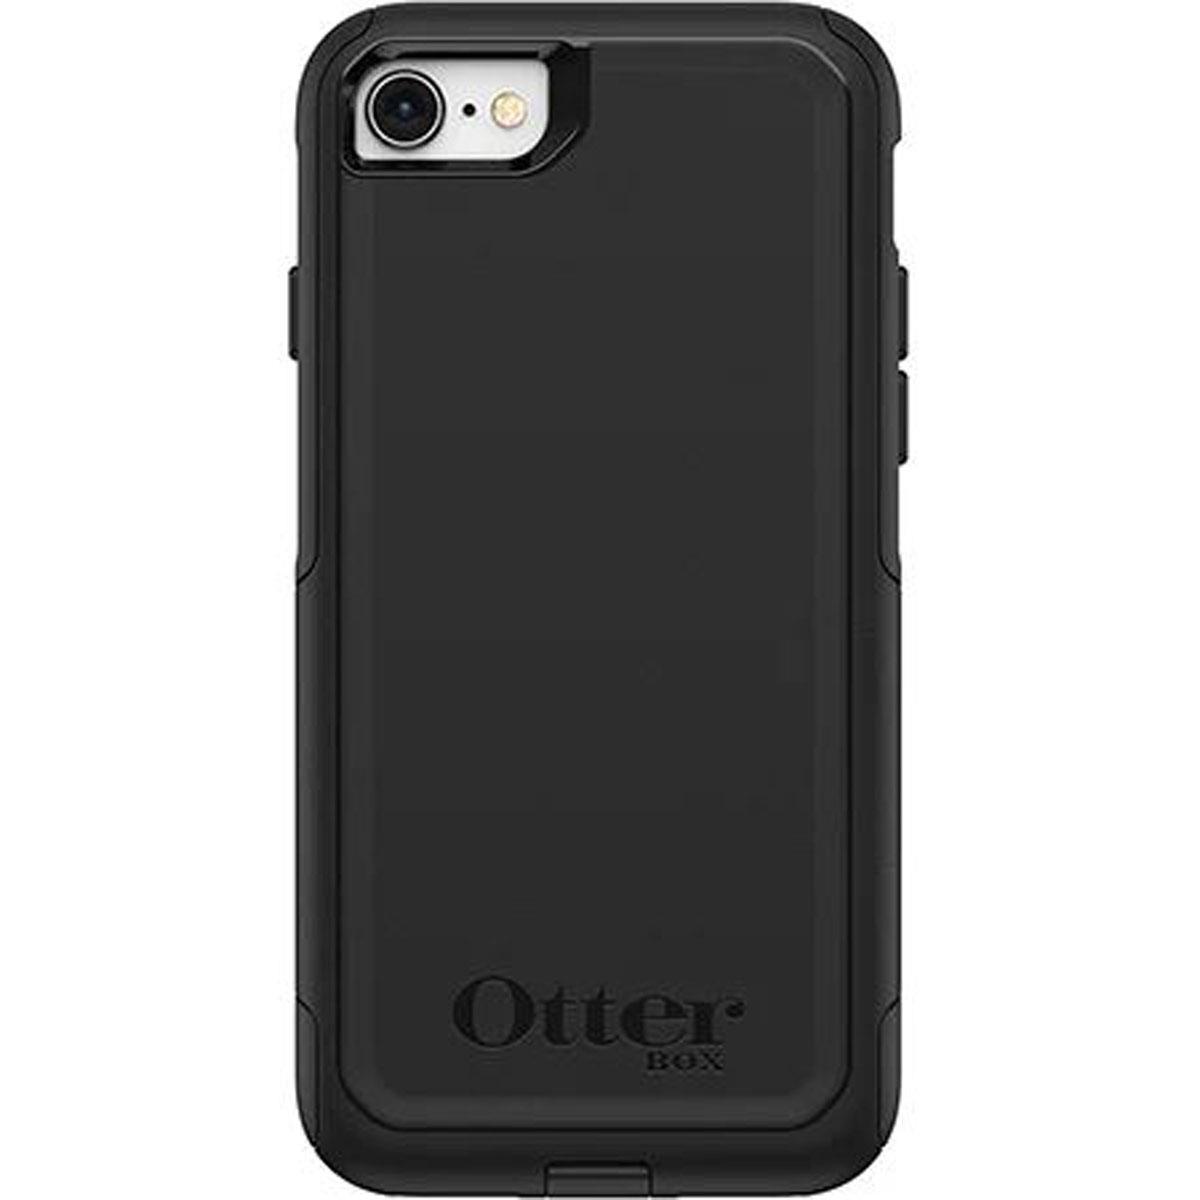 Image of OtterBox Otterbox Commuter Case for iPhone 8